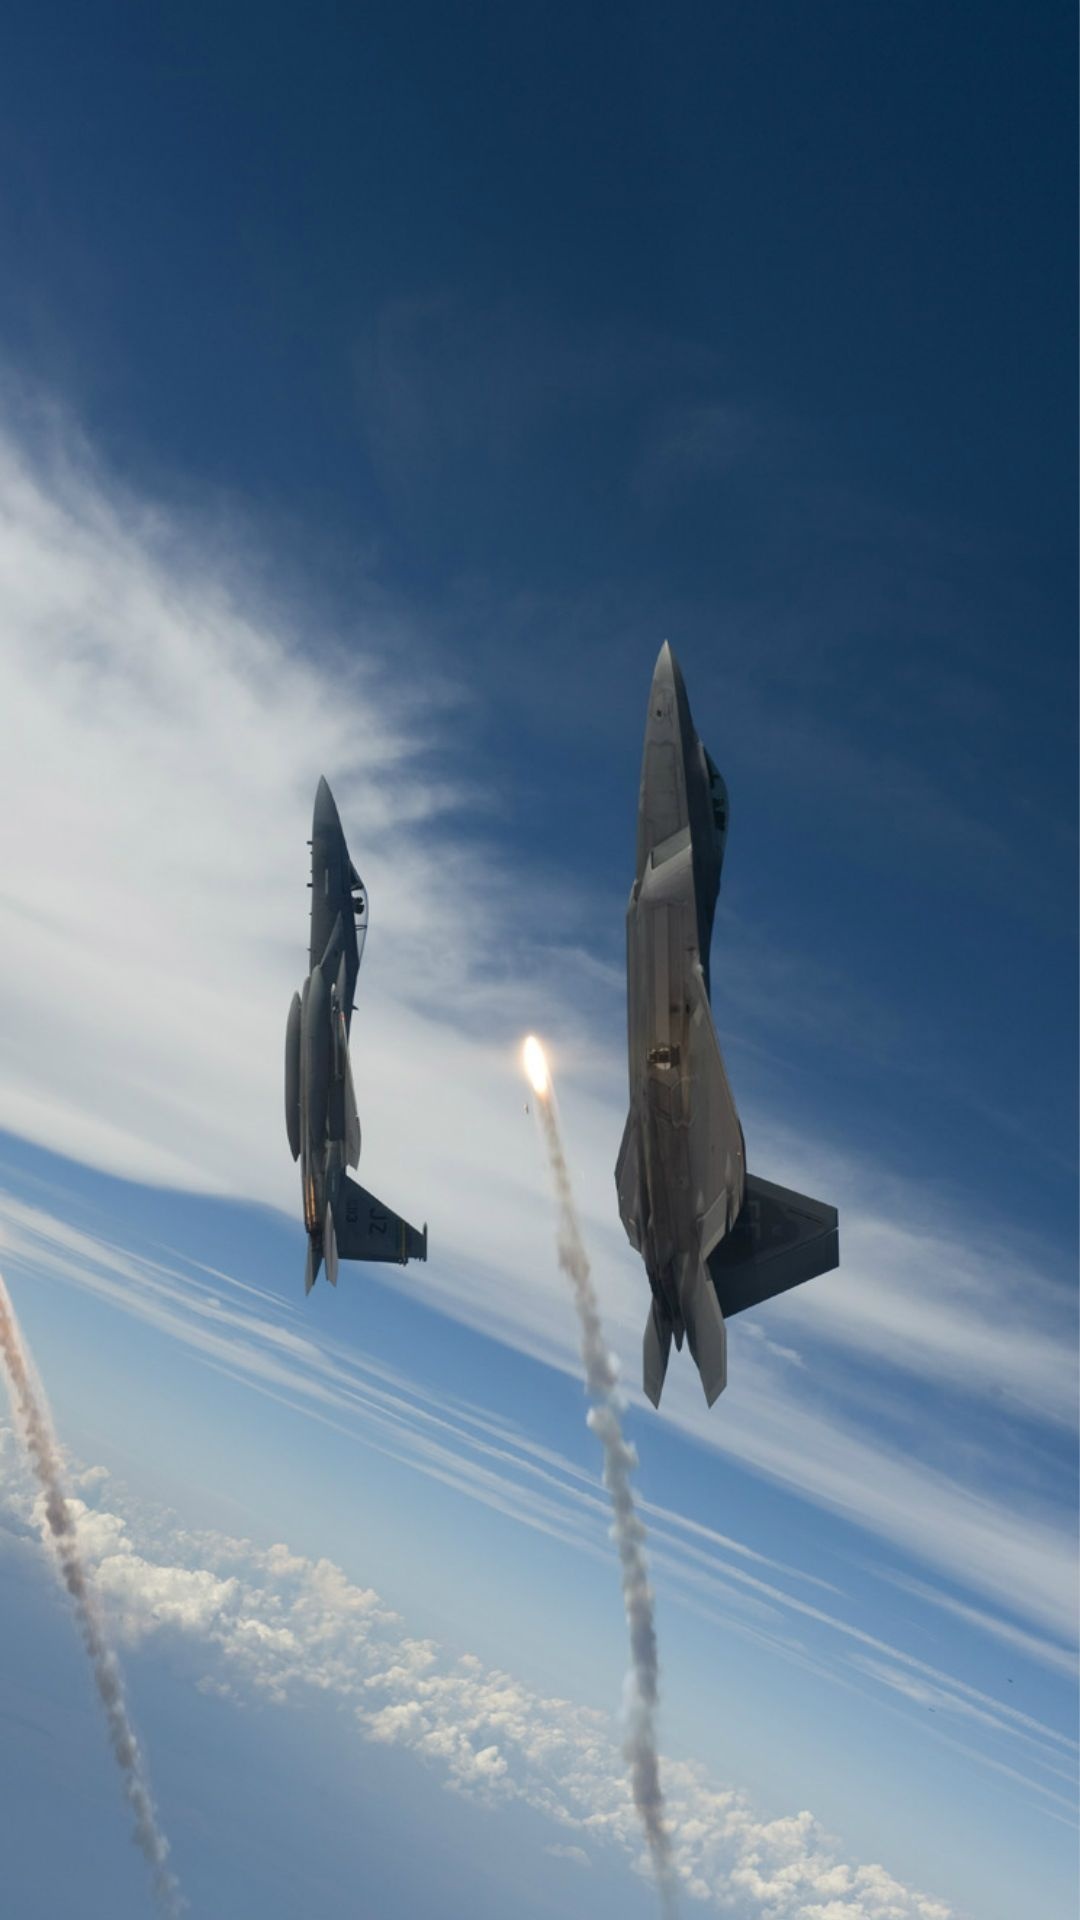 F-22 Raptor, USAF iPhone wallpapers, Military aviation, Top-notch technology, 1080x1920 Full HD Phone